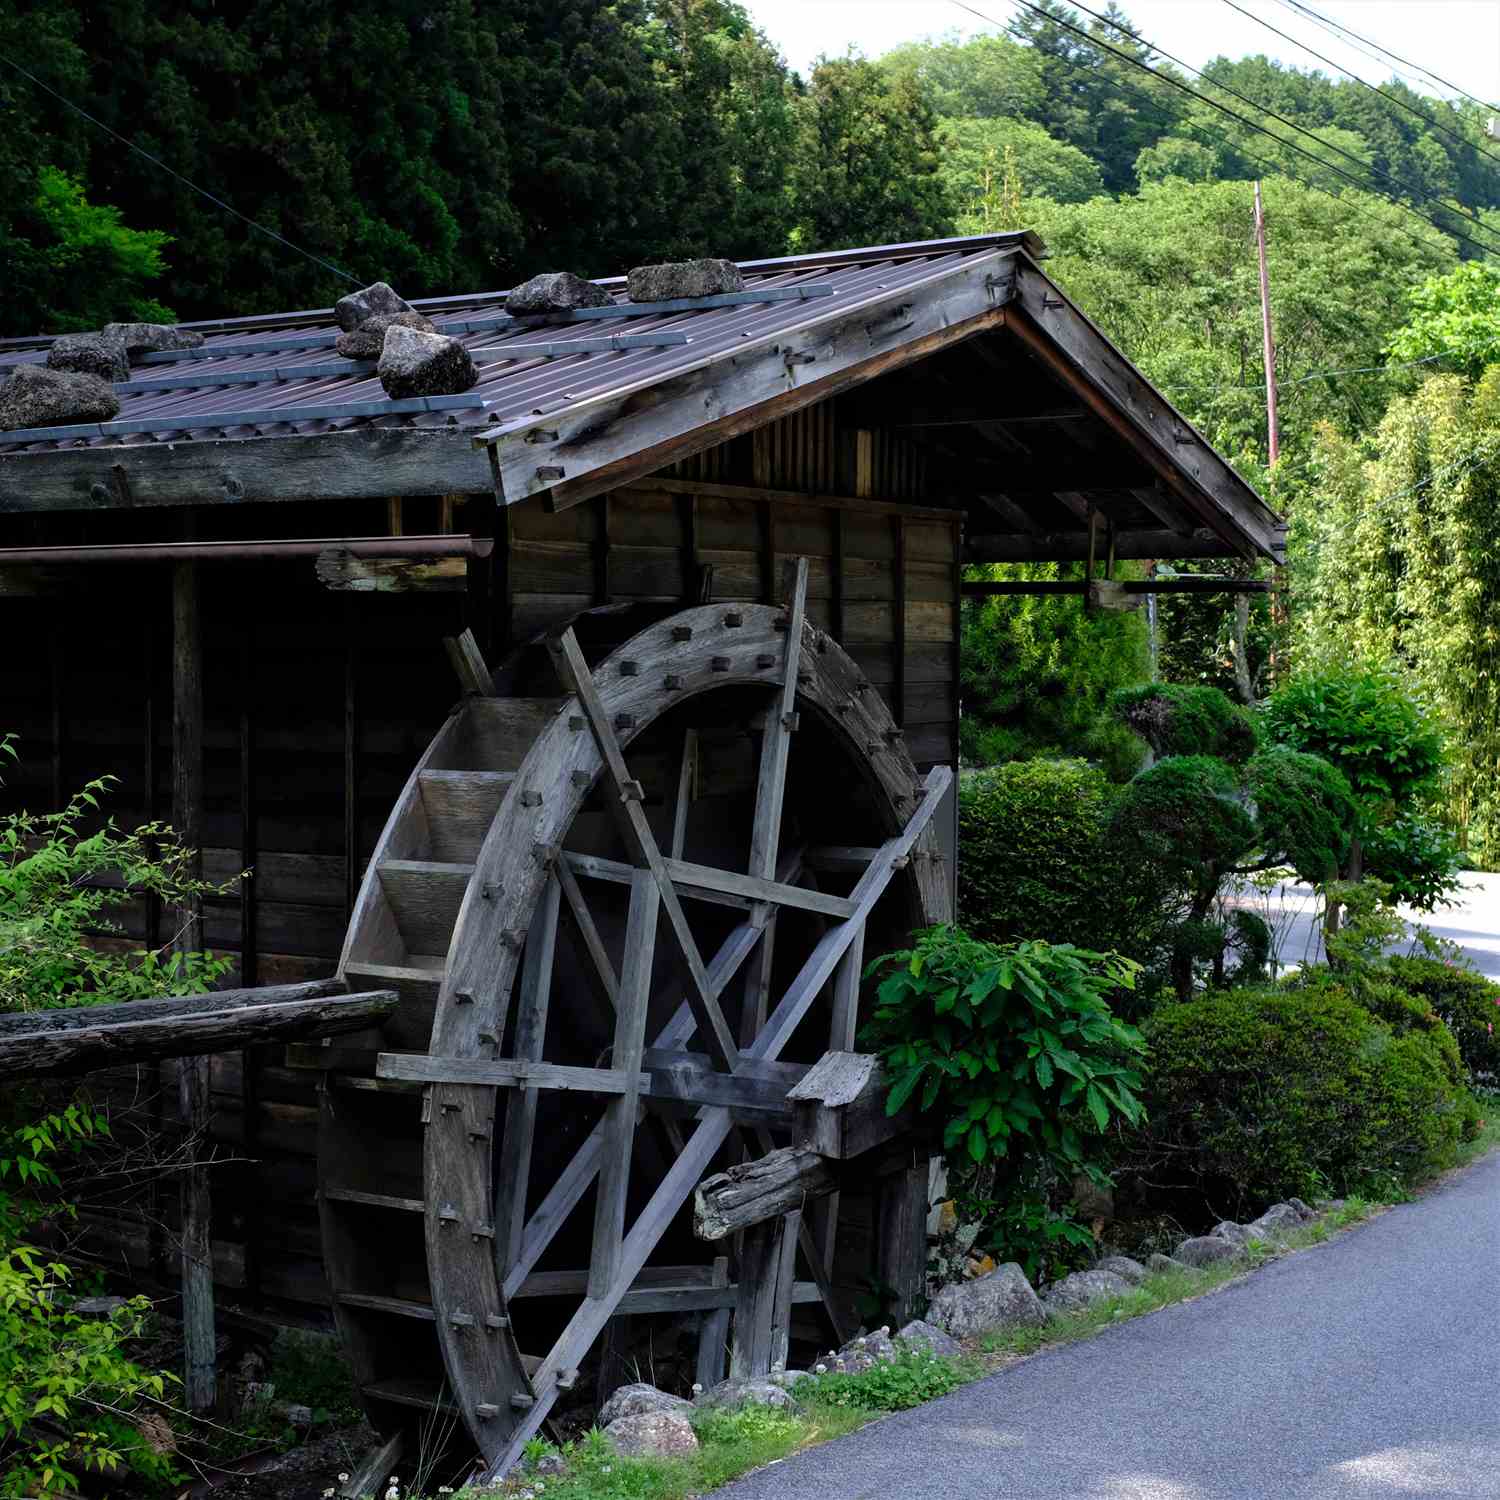 Magome and Tsumago where the image of post towns in the Edo period are left = Shutterstock 9